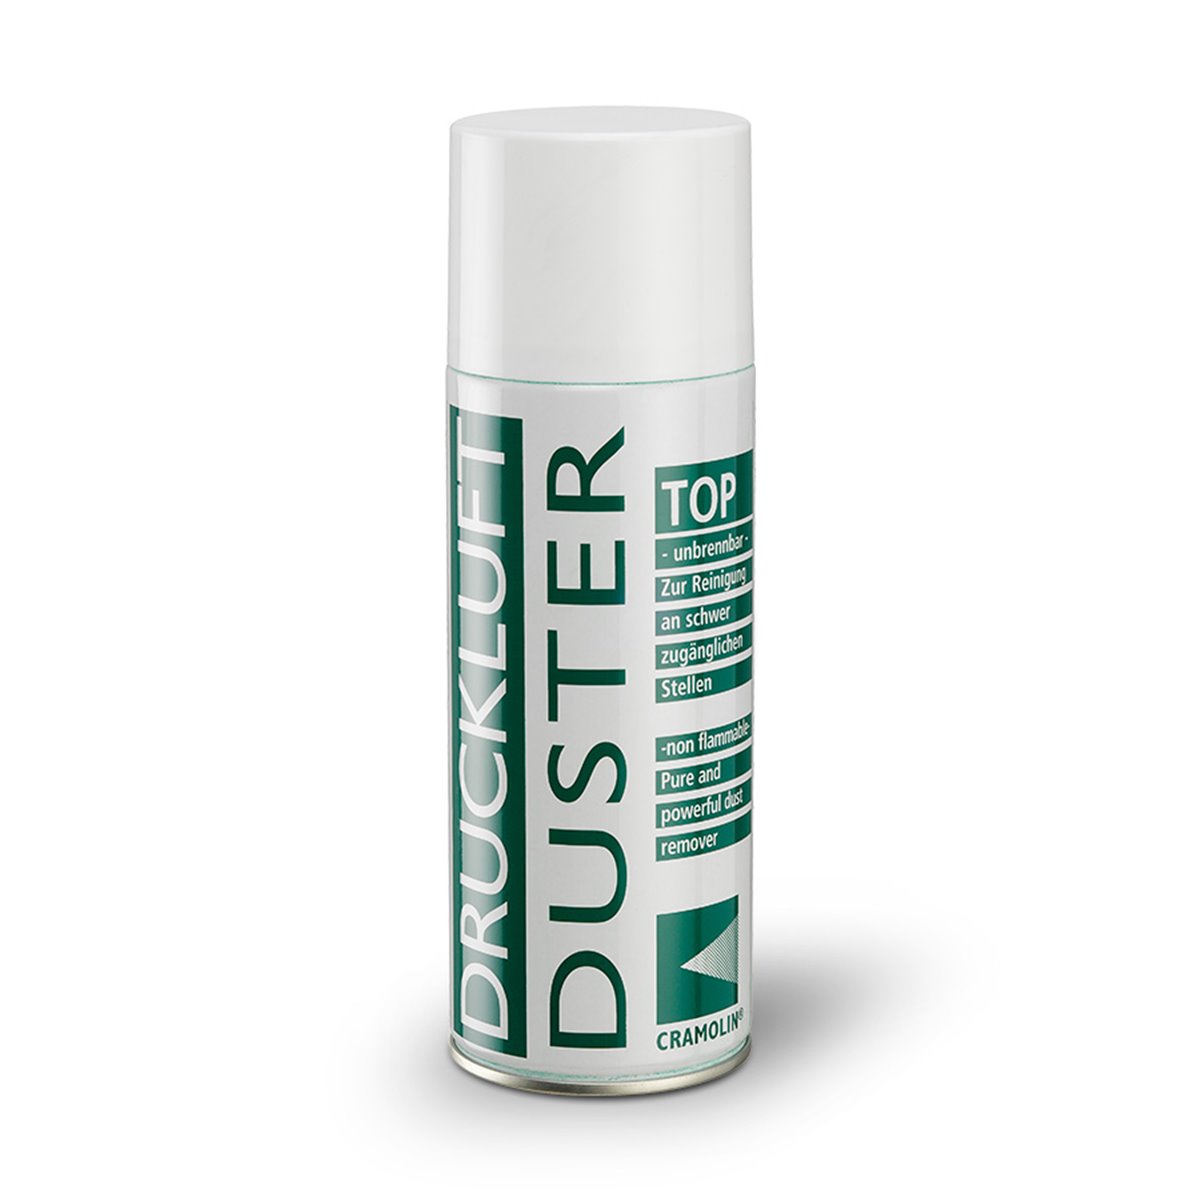 Non-flammable dust removal agent DUSTER-TOP (DRUCKLUFT-TOP) Cramolin.